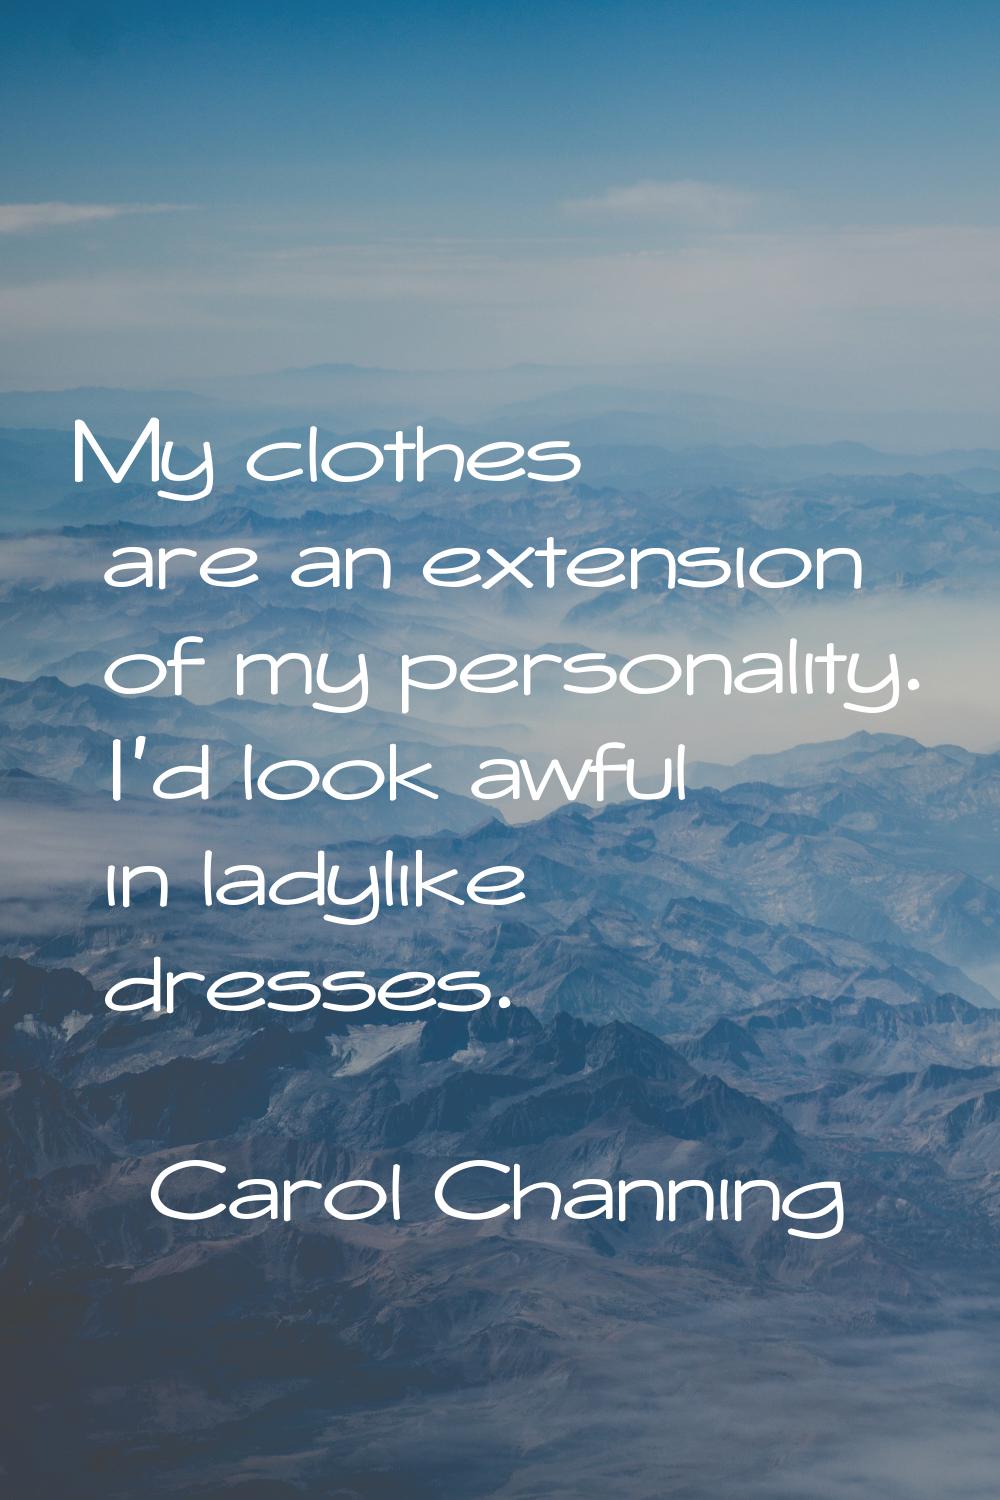 My clothes are an extension of my personality. I'd look awful in ladylike dresses.